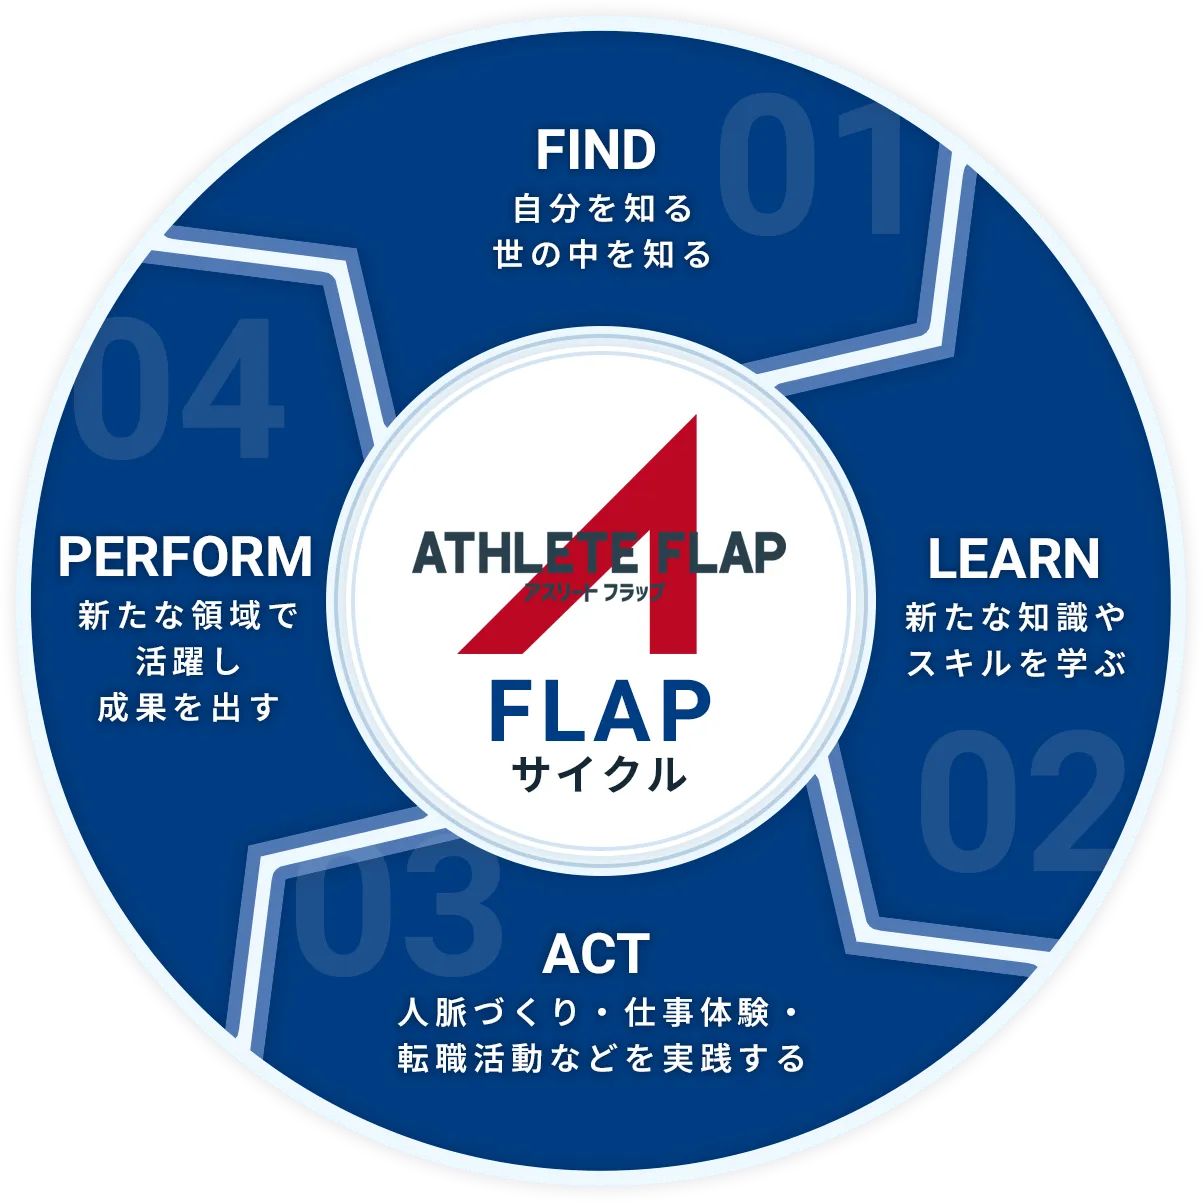 FLAPサイクル Find Learn Act Perform